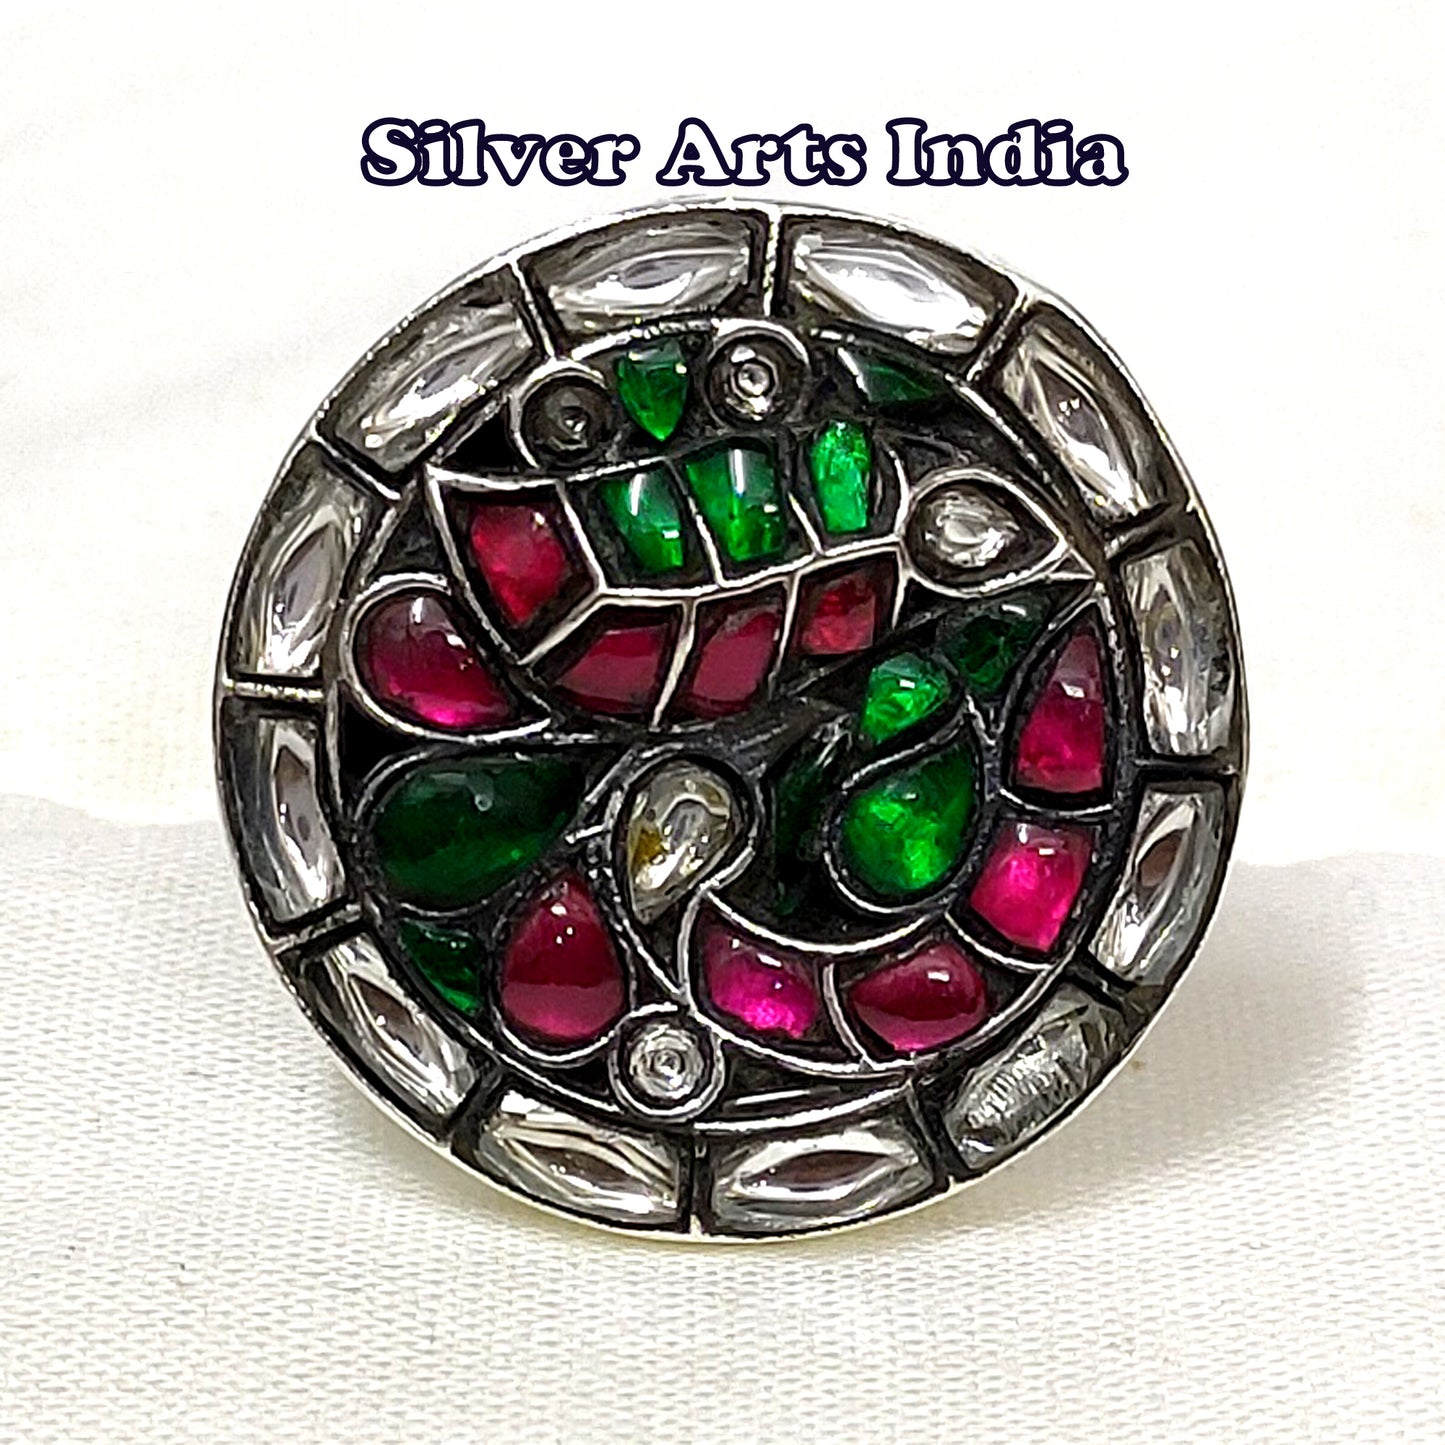 Kundan Polki Red Stones And Green Stones Solid 925 Silver Adjustable Ring